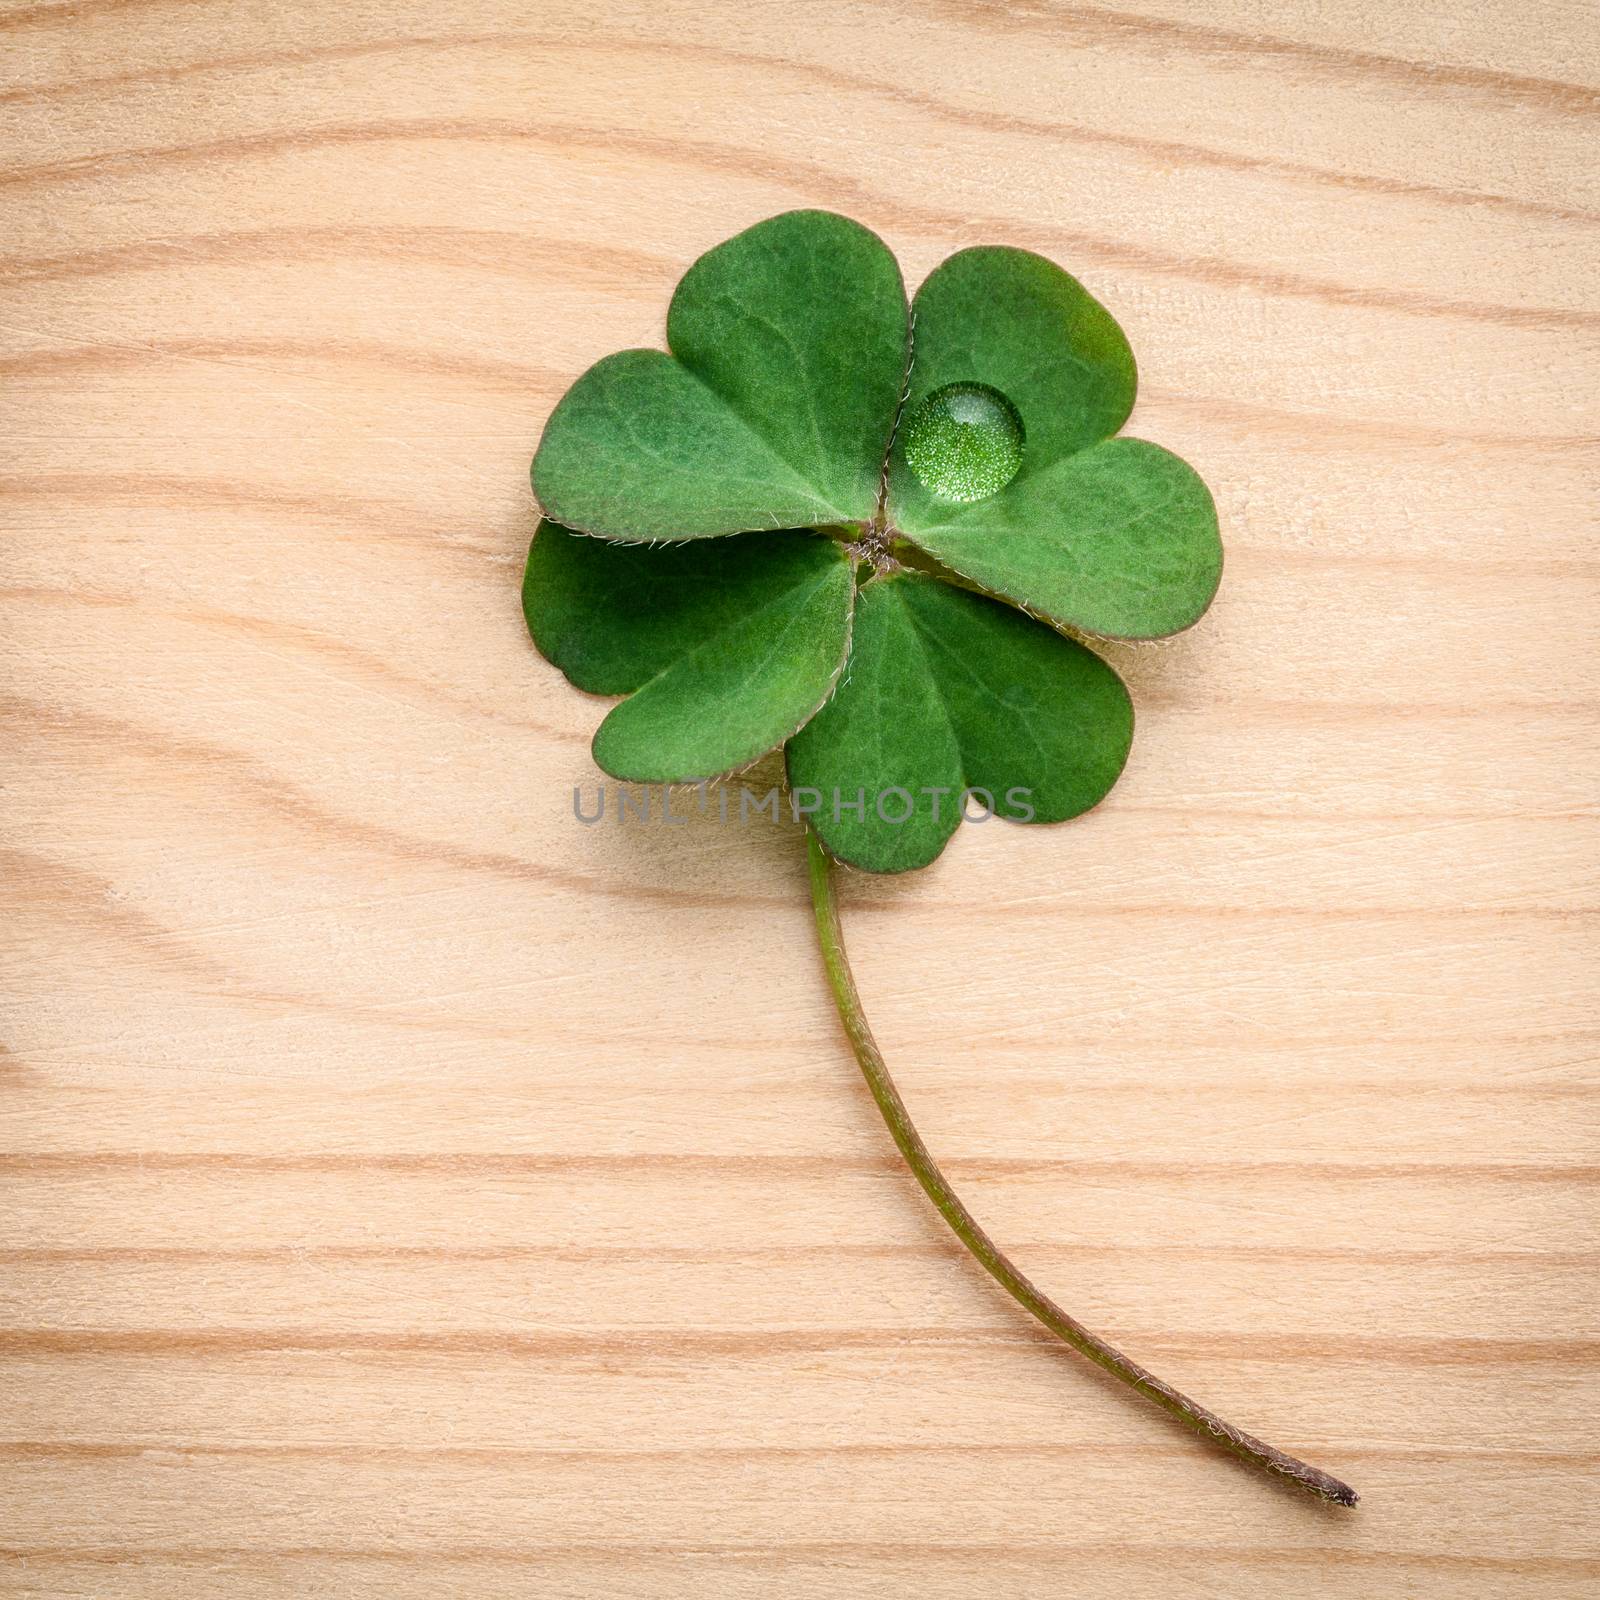 Clovers leaves on wooden background.The symbolic of Four Leaf Cl by kerdkanno